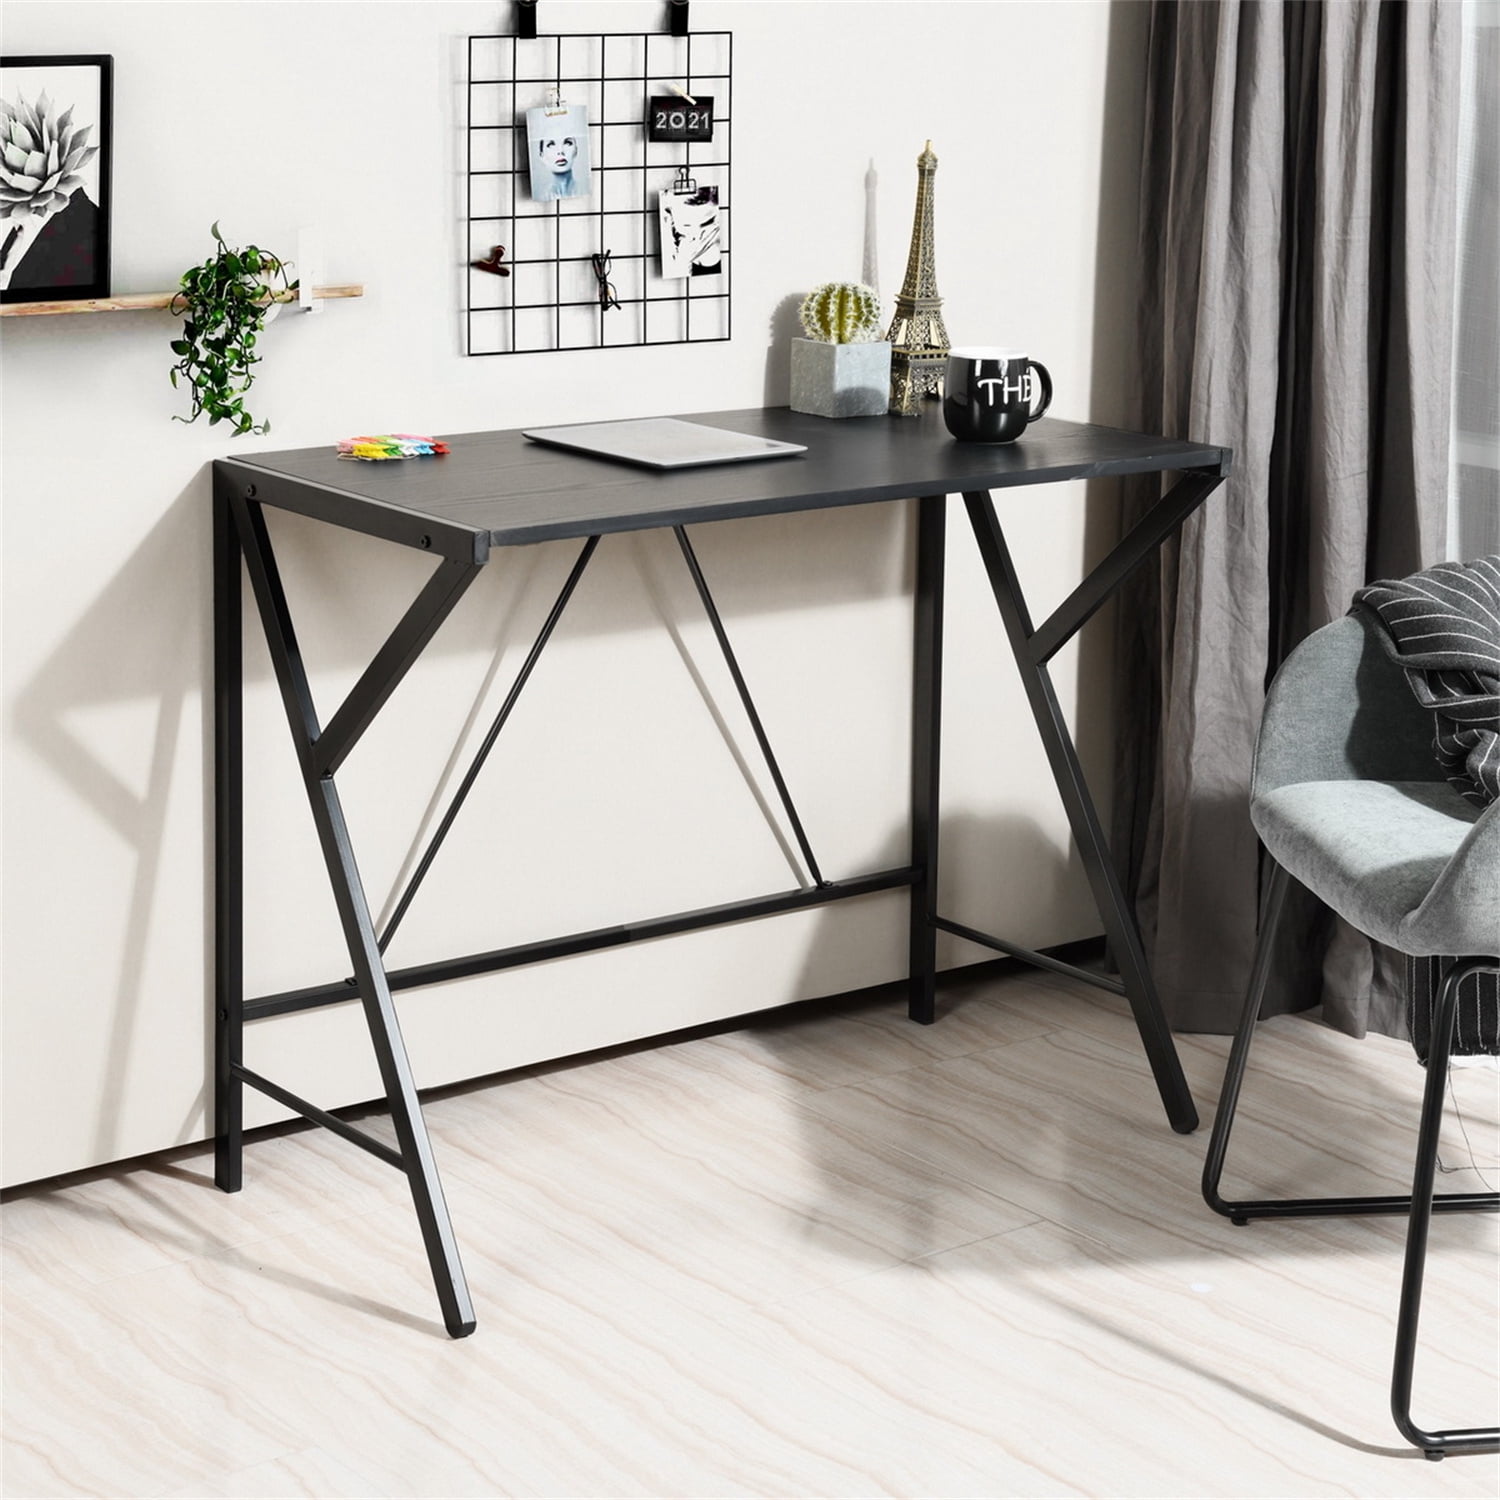 Modern Simple Style Desk PC Laptop Table Workstation Dining Gaming Table for Home Office Sturdy Writing Desk,Black ODK Computer Desk 